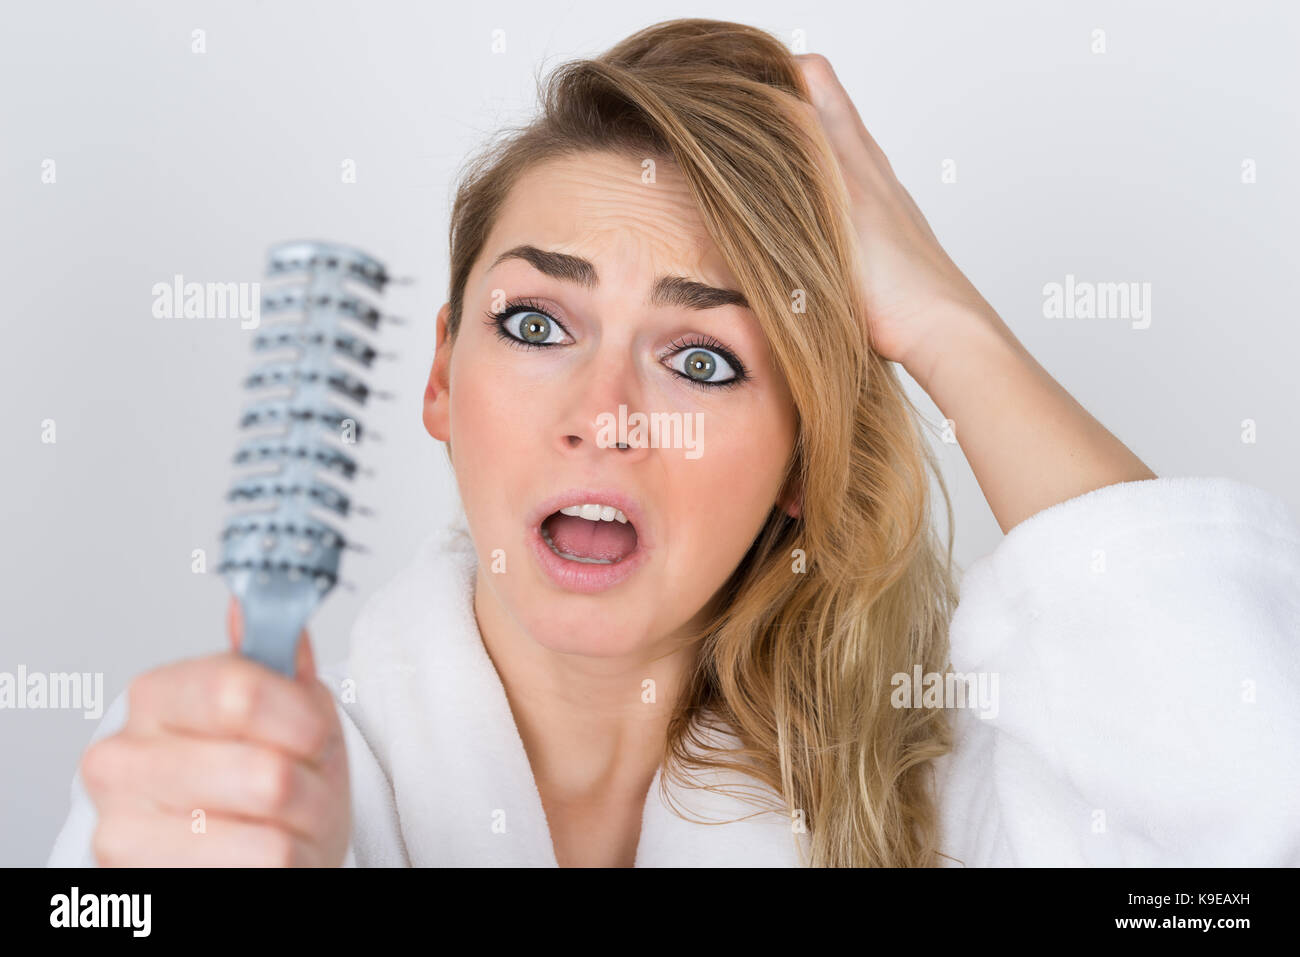 Worried Woman Suffering From Hairloss Looking At Comb Stock Photo